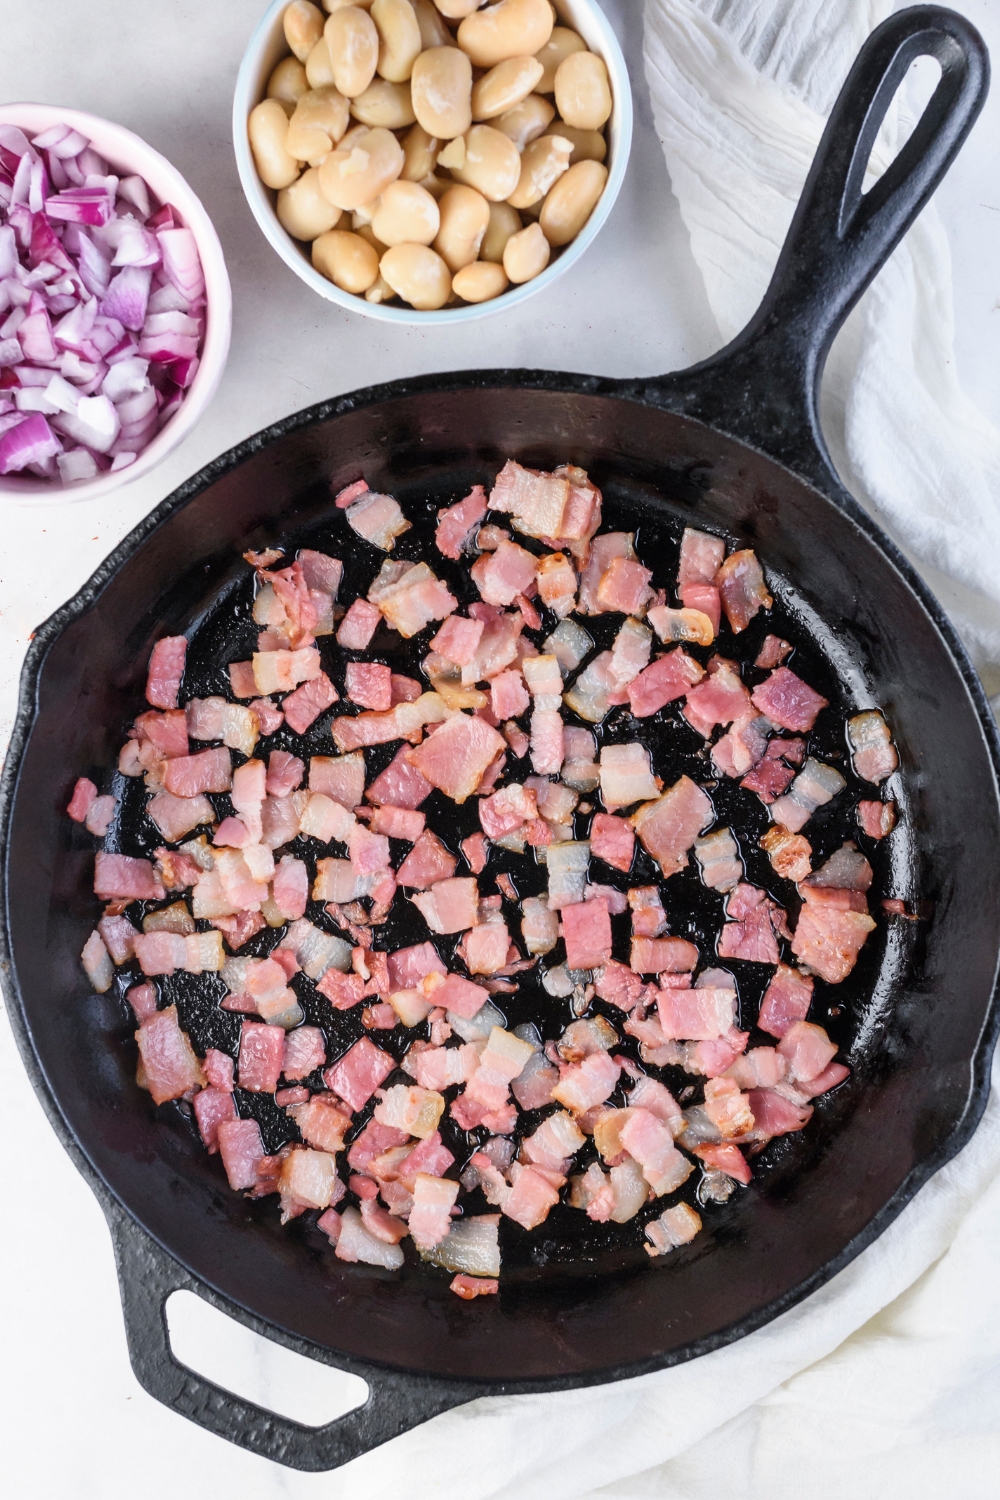 A black skillet filled with diced bacon cooking in it.